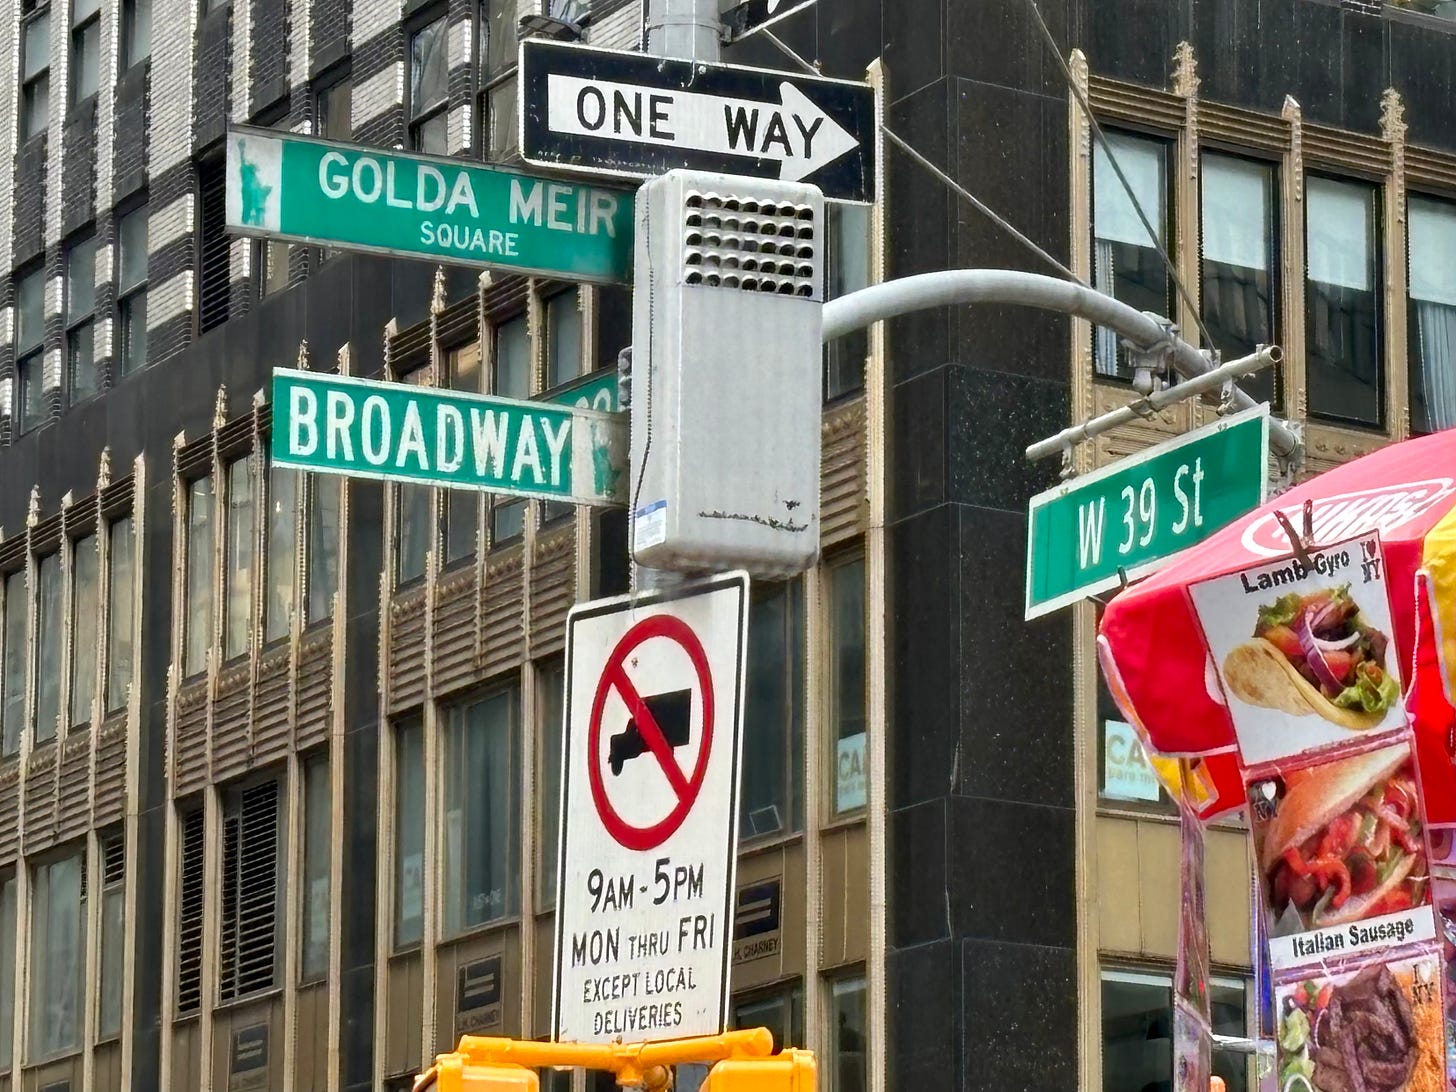 Three street signs at Broadway and W 39th St giving the intersection and markign Golda Meir Square. There is also a food cart with a sign for a lamb gyro.